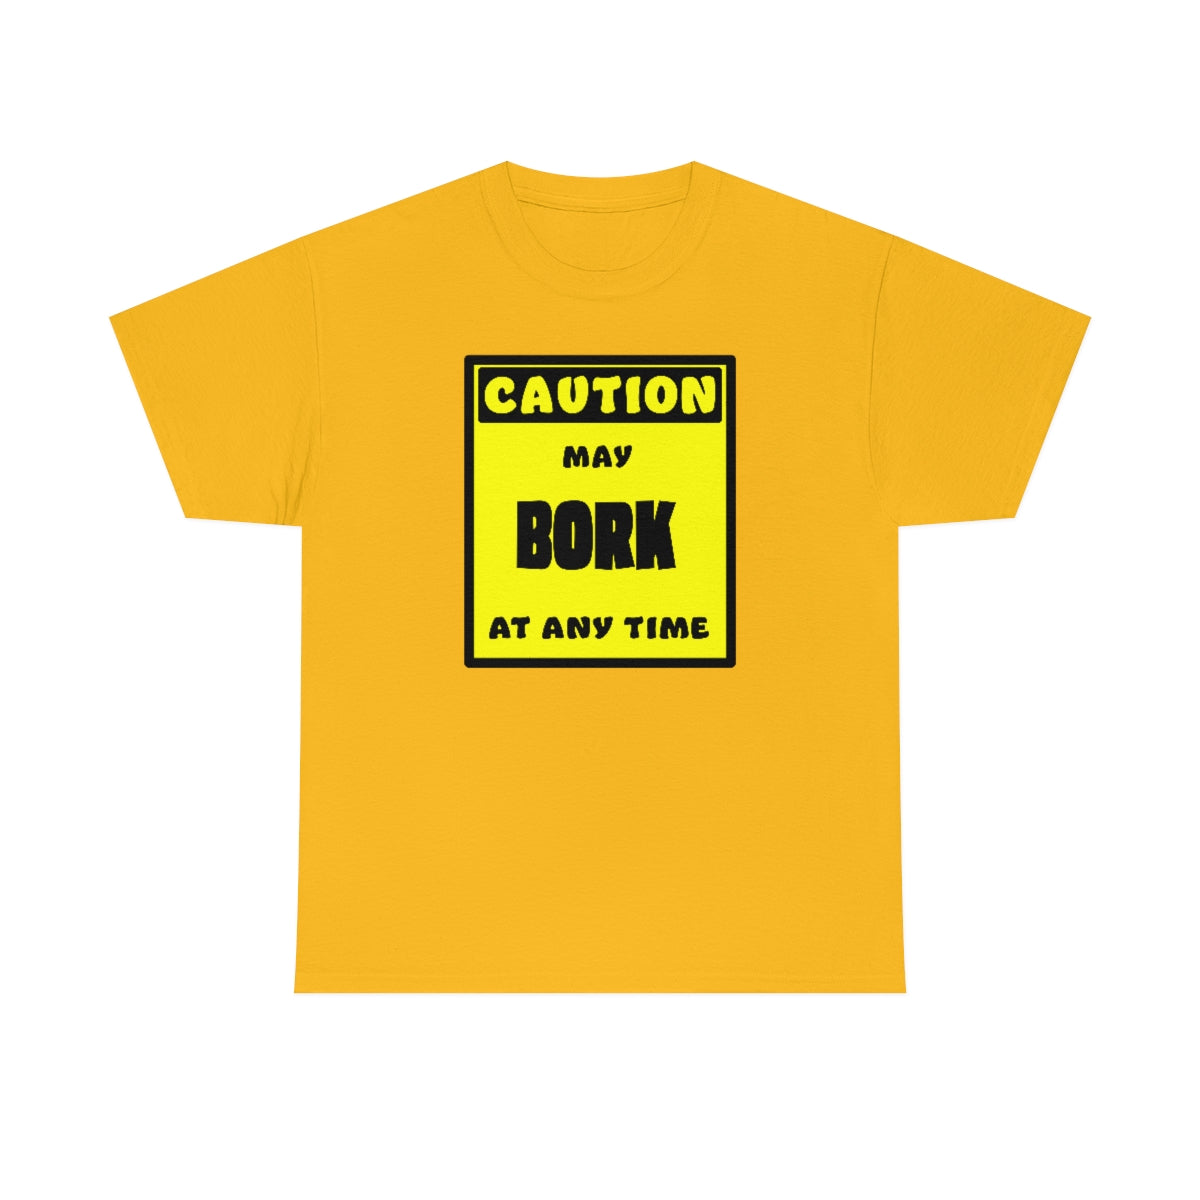 CAUTION! May BORK at any time! - T-Shirt T-Shirt AFLT-Whootorca Gold S 